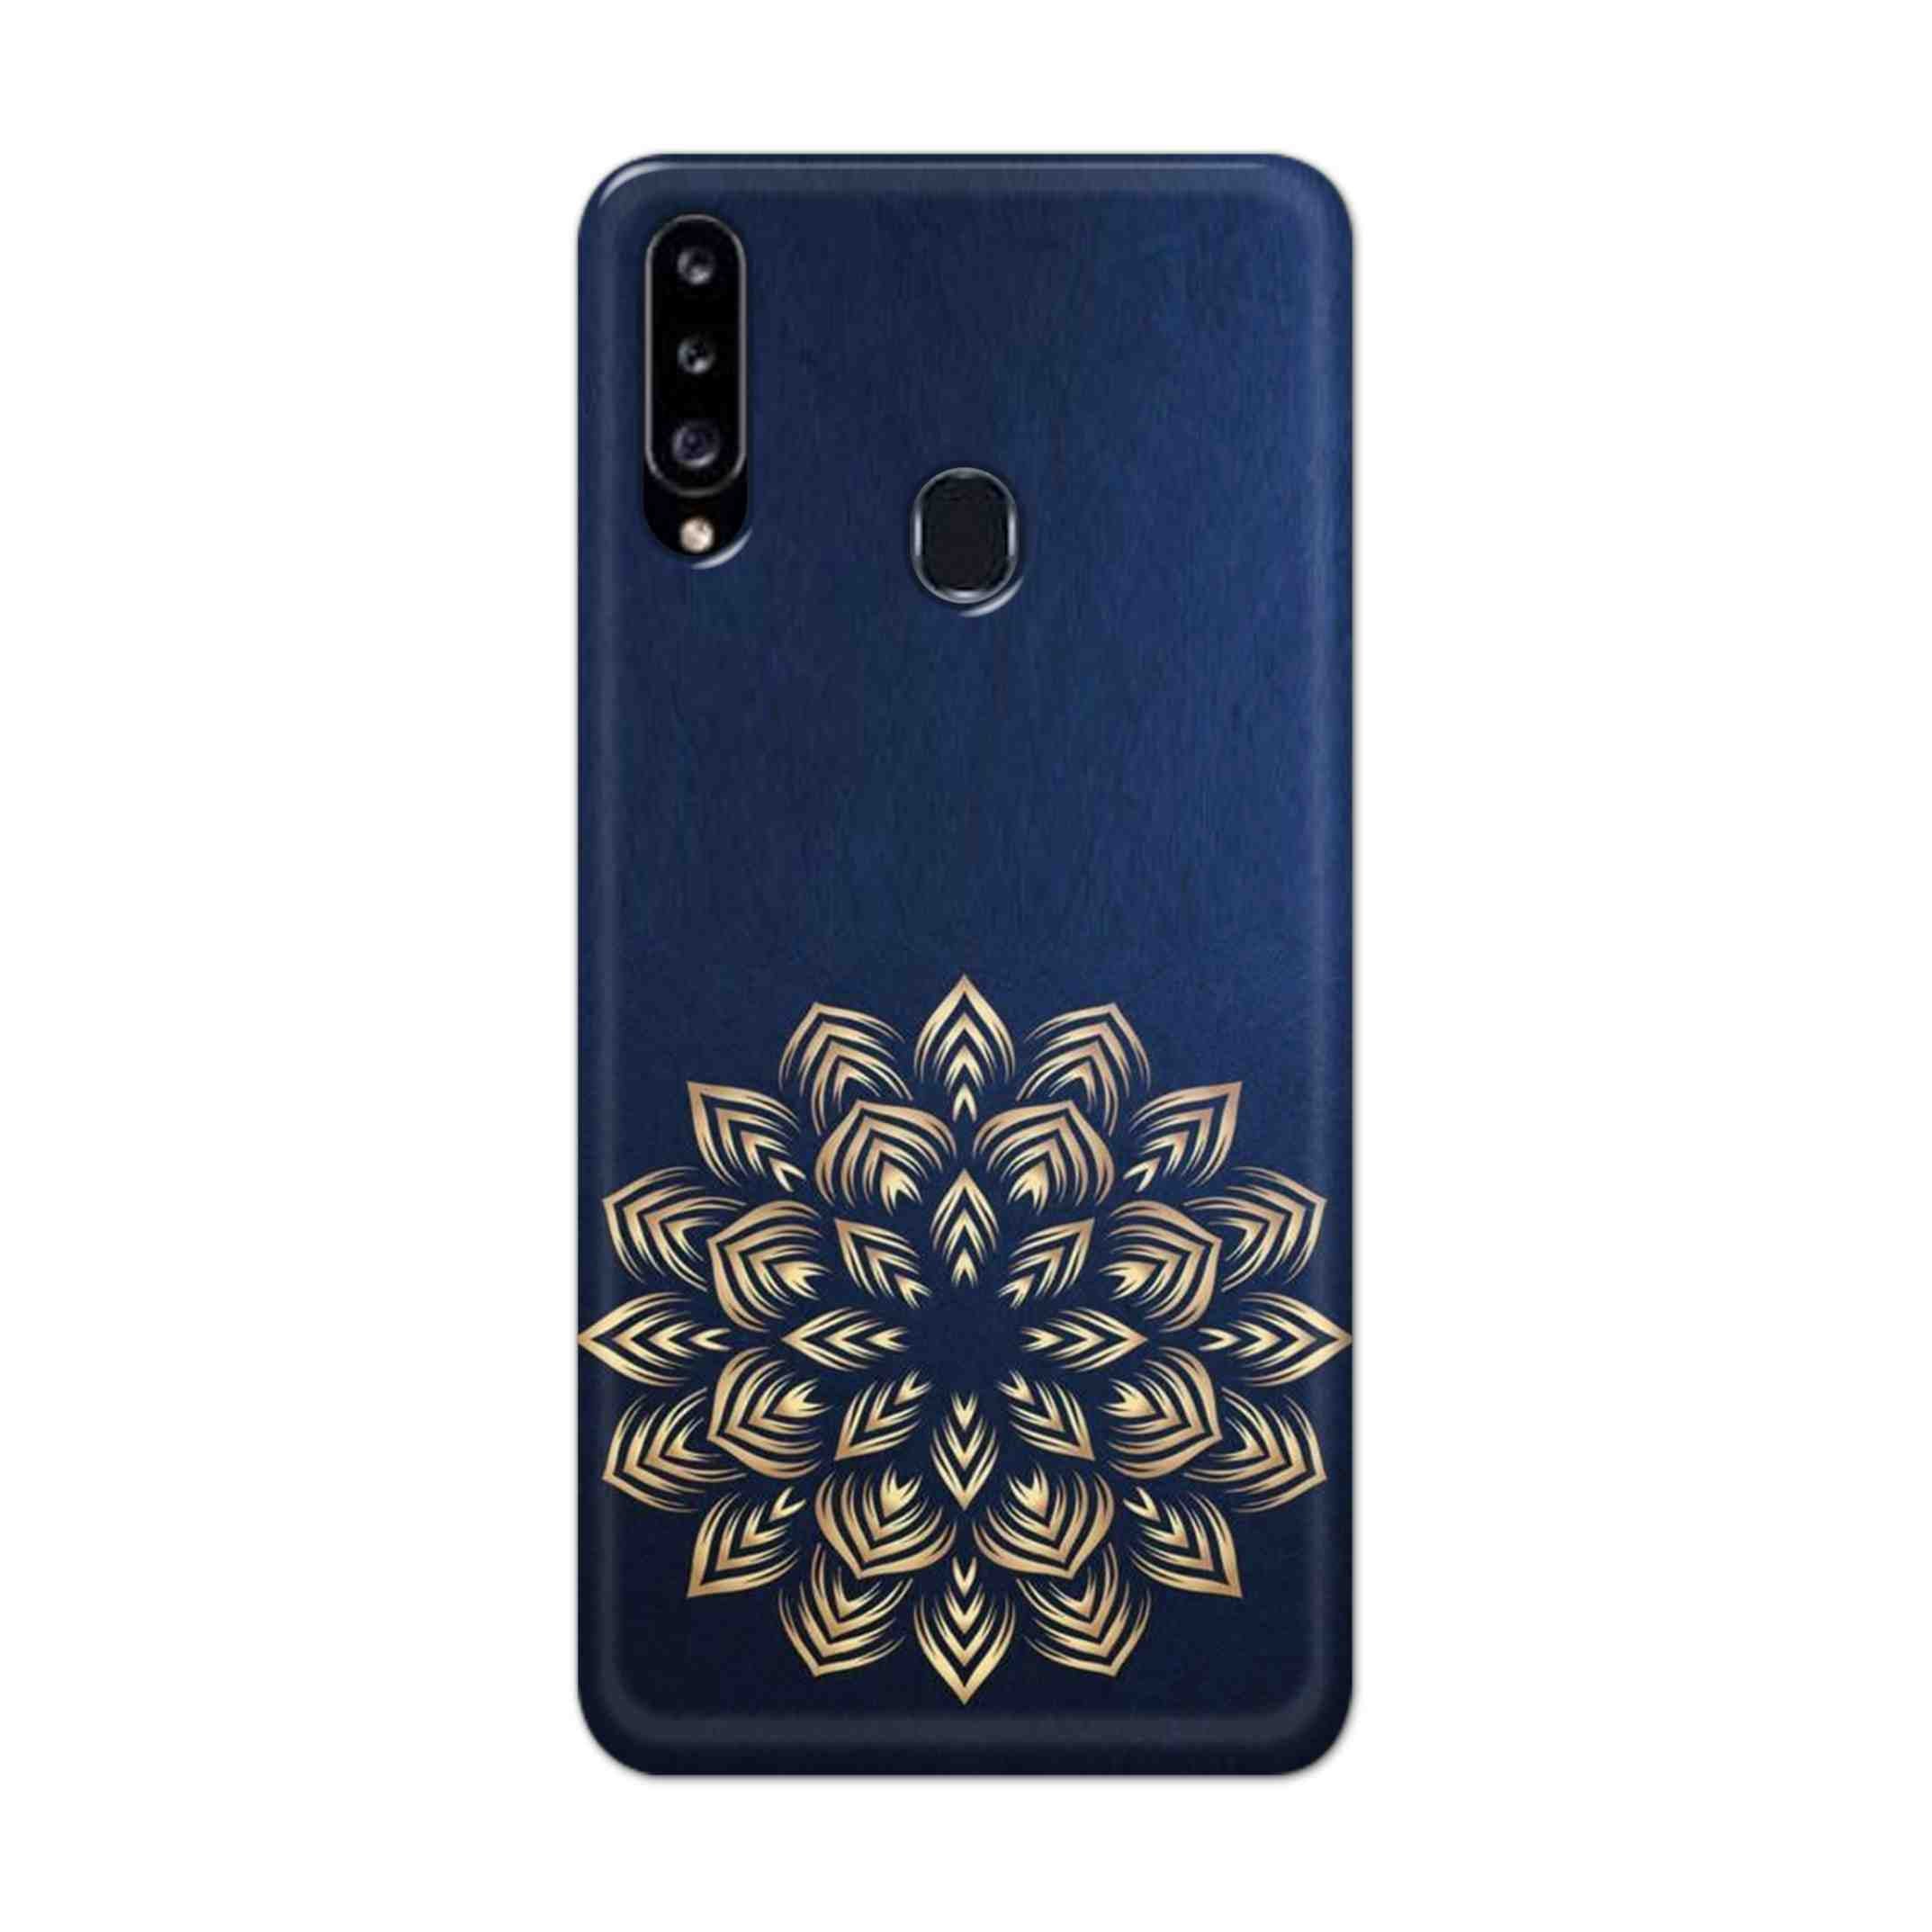 Buy Heart Mandala Hard Back Mobile Phone Case Cover For Samsung Galaxy A21 Online